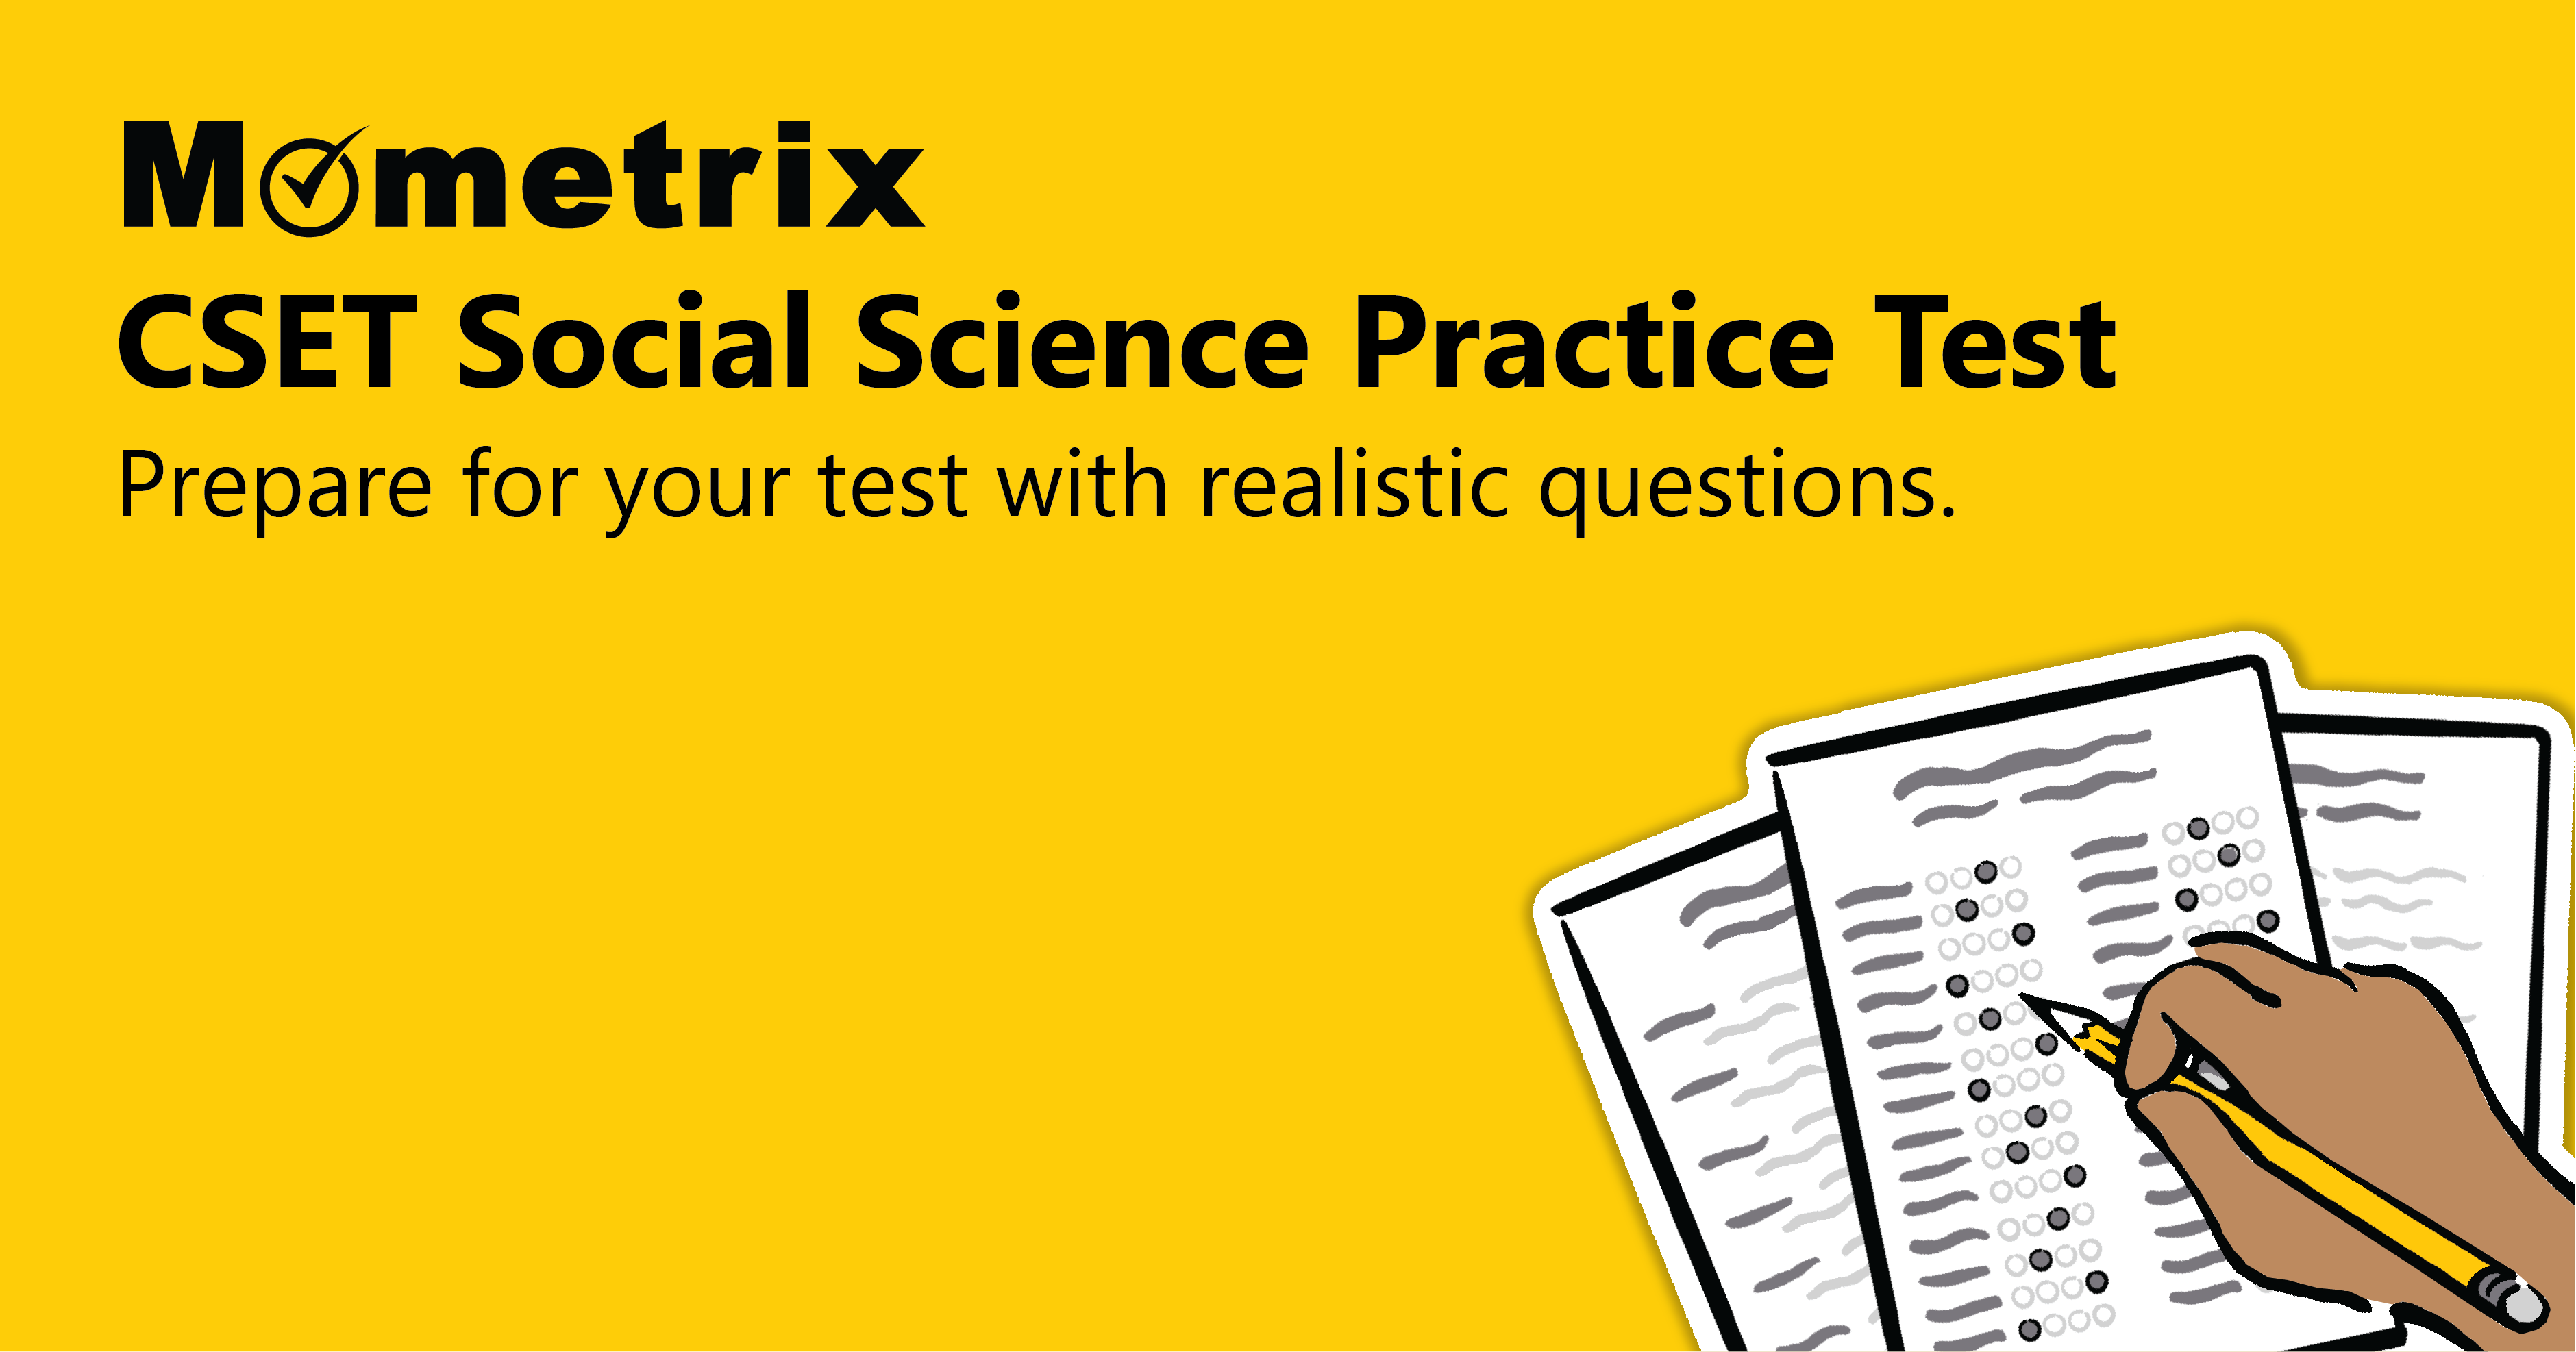 Mometrix CSET Social Science Practice Test cover. Text: "Prepare for your test with realistic questions." Illustration of a hand filling out an answer sheet.